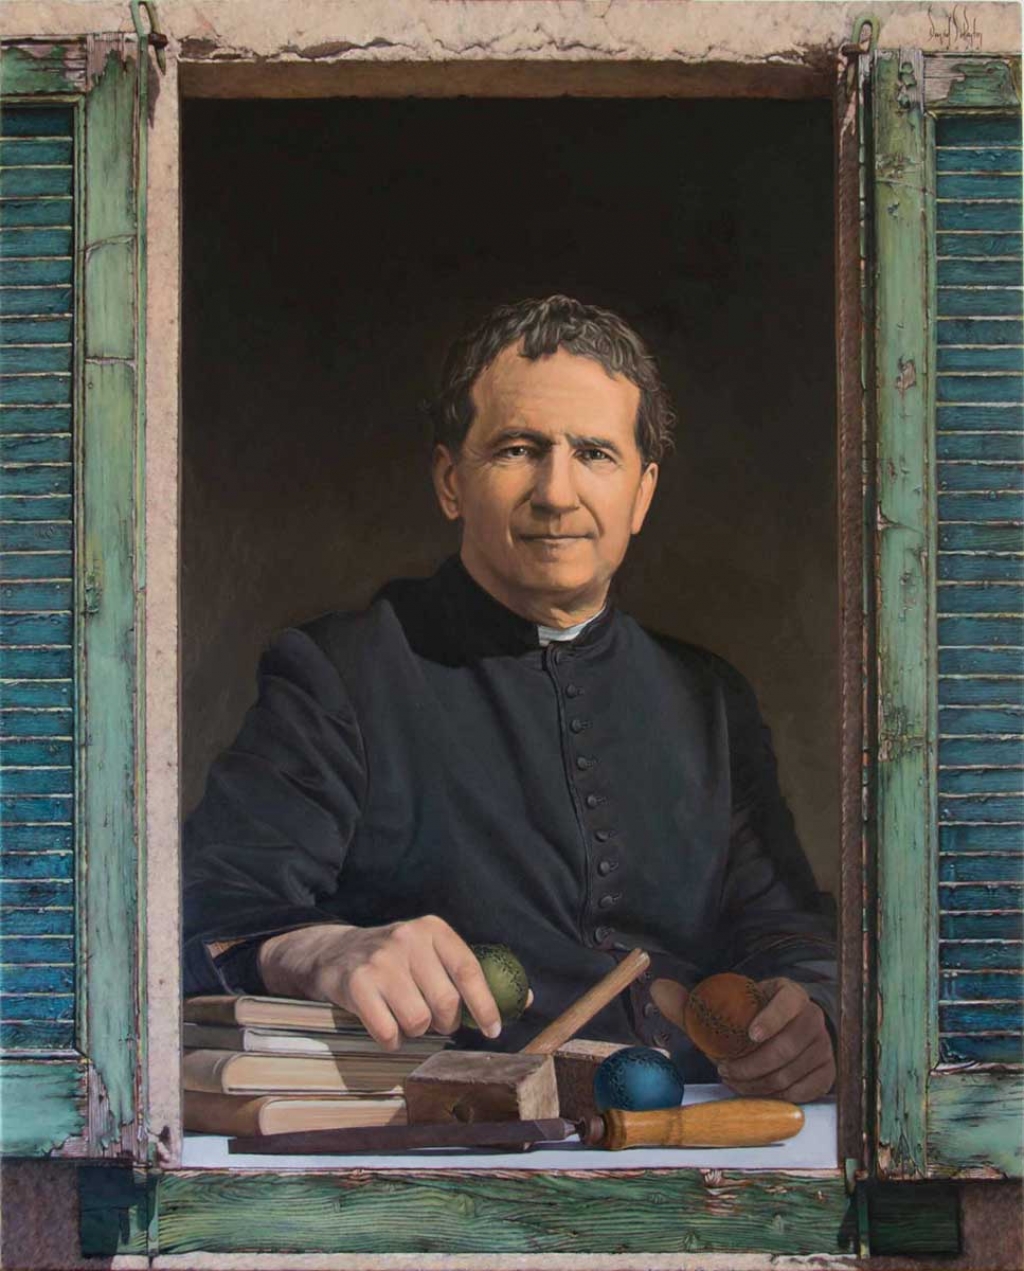 Spain – New painting of Don Bosco. Green shutter, a point of hope ...